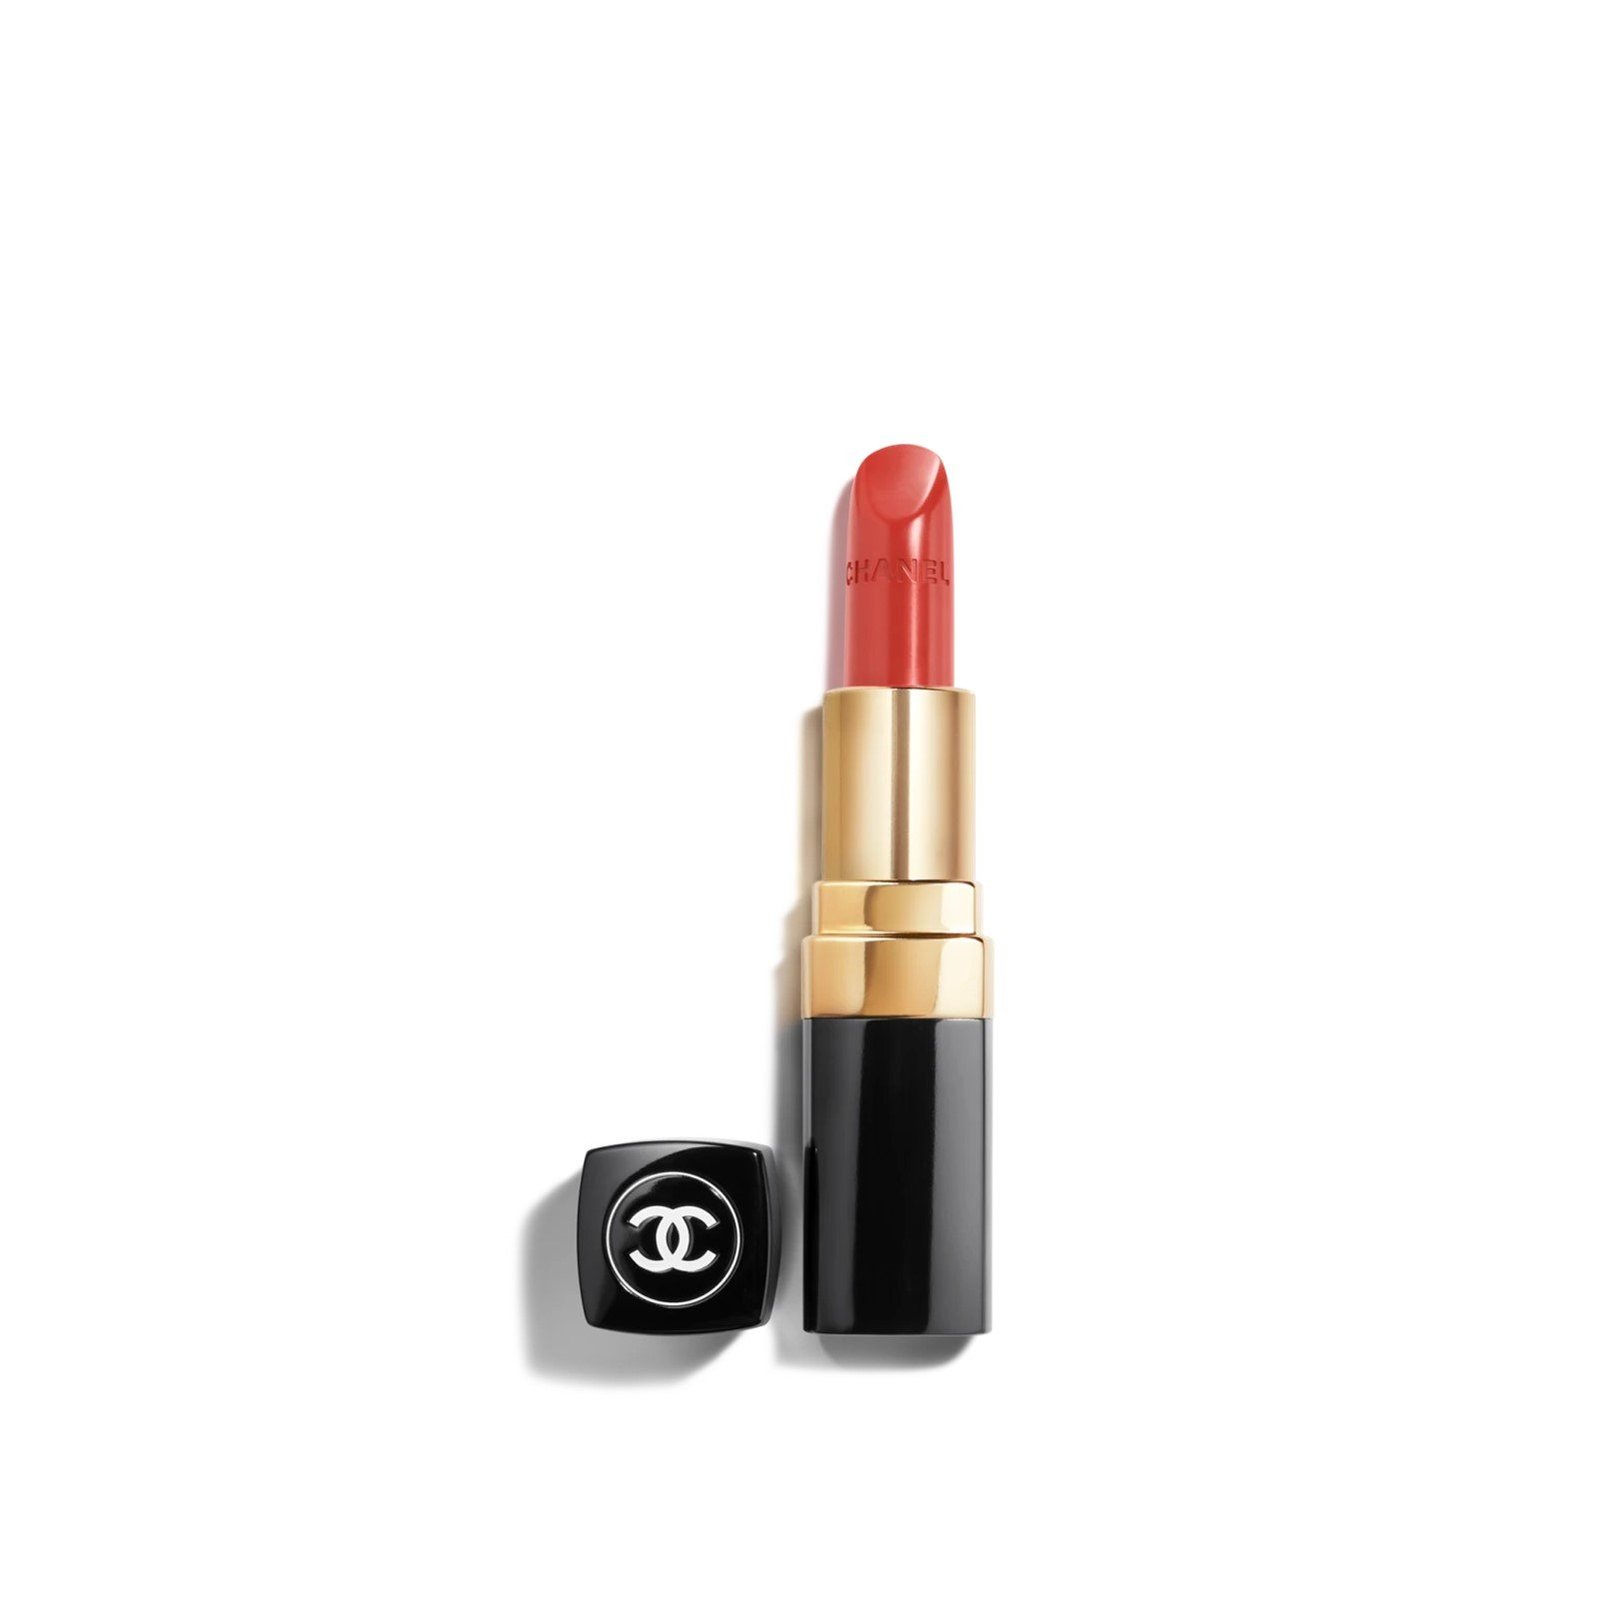 CHANEL Rouge Coco Ultra Hydrating Lip Colour 416 Coco 3.5g